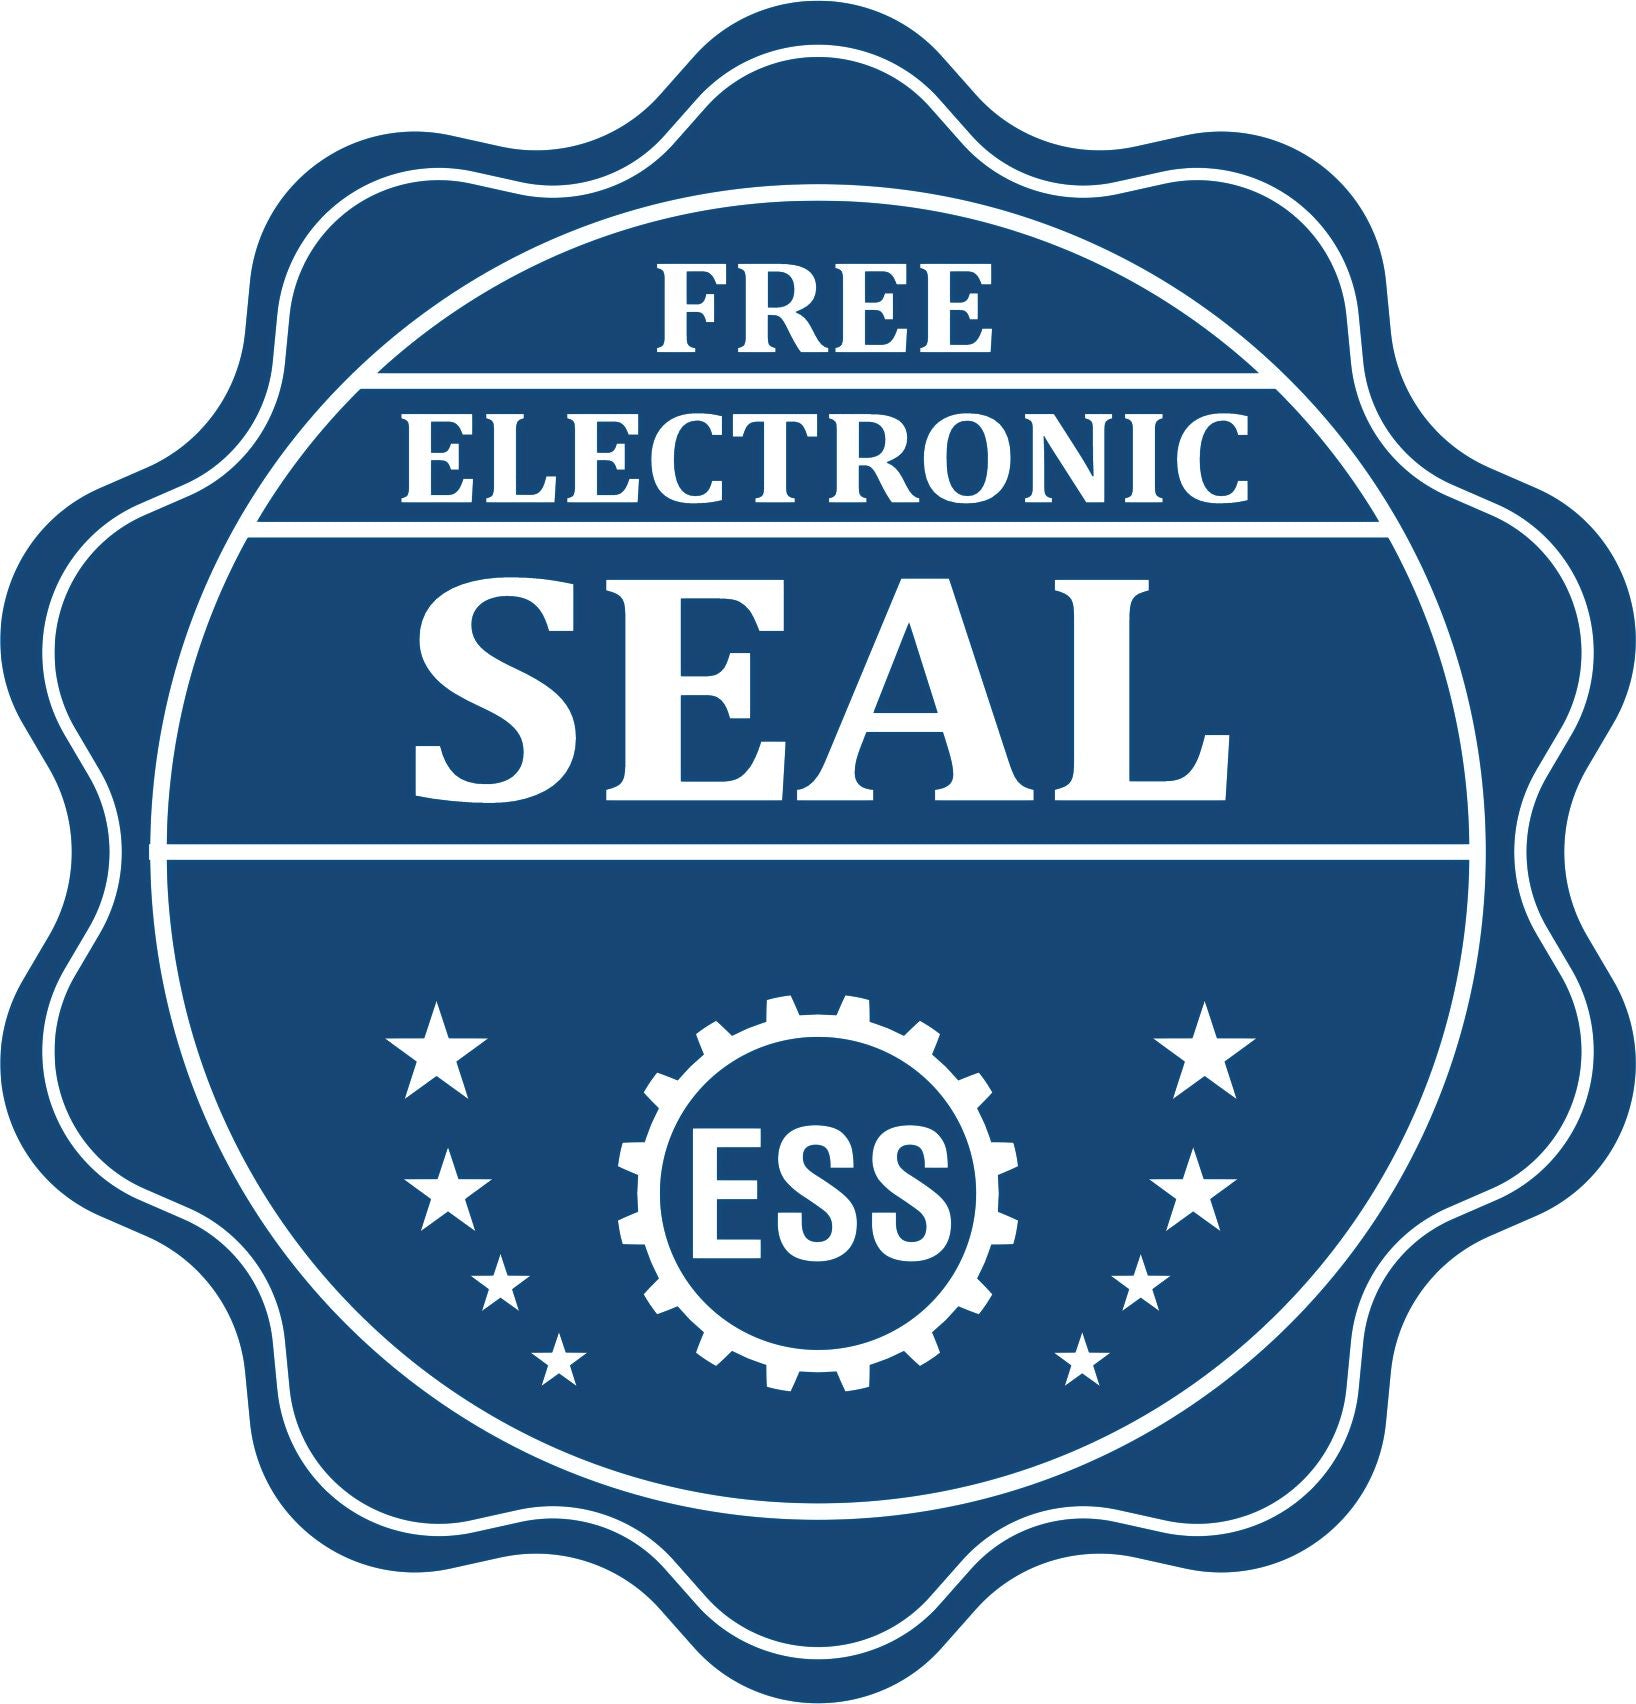 A badge showing a free electronic seal for the Gift Kentucky Landscape Architect Seal with stars and the ESS gear on the emblem.